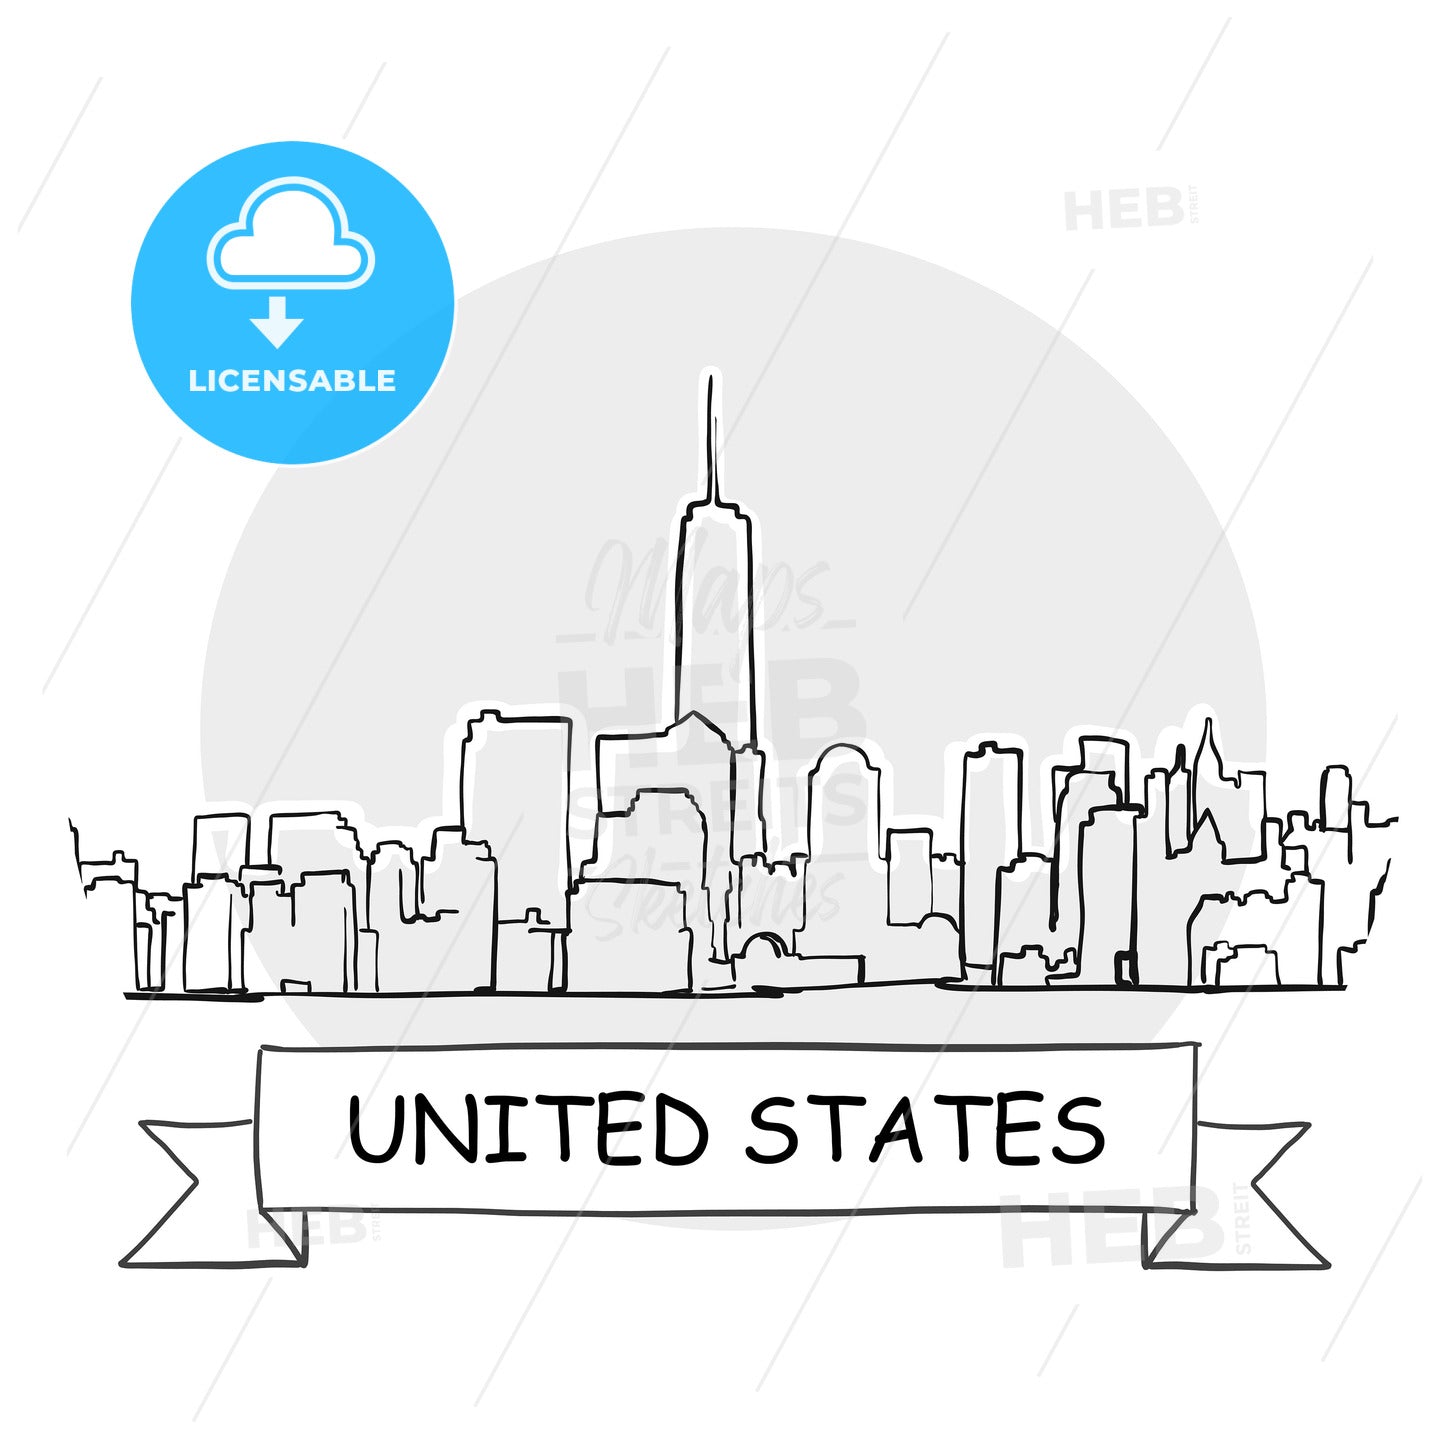 United States hand-drawn urban vector sign – instant download